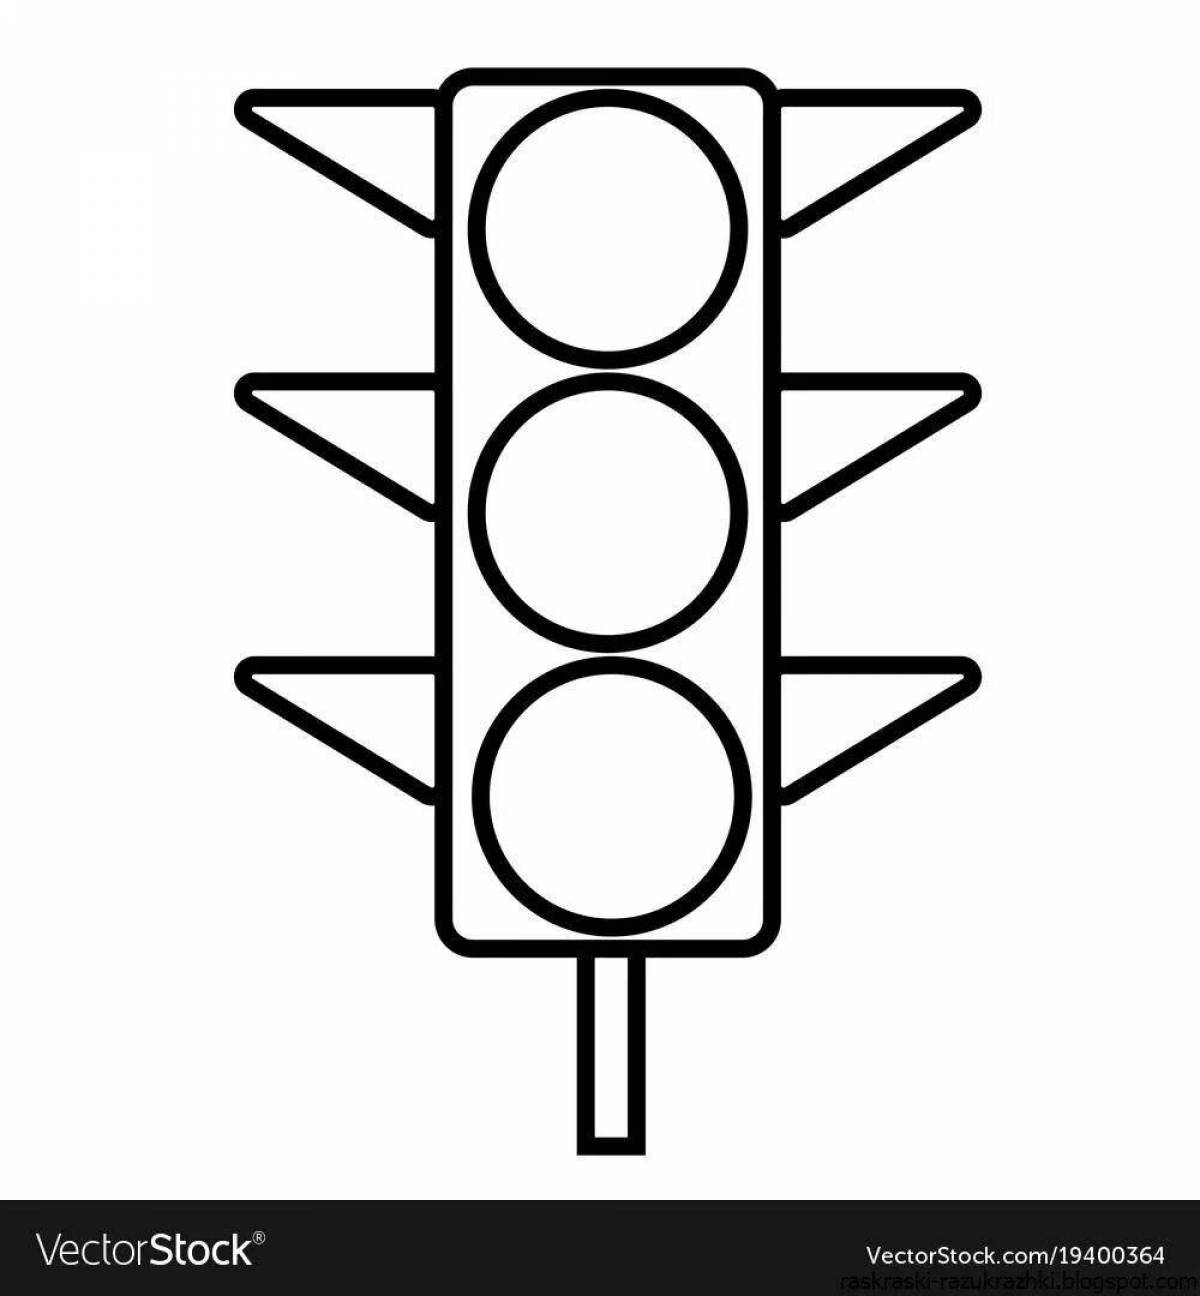 Inviting traffic light coloring book for kids